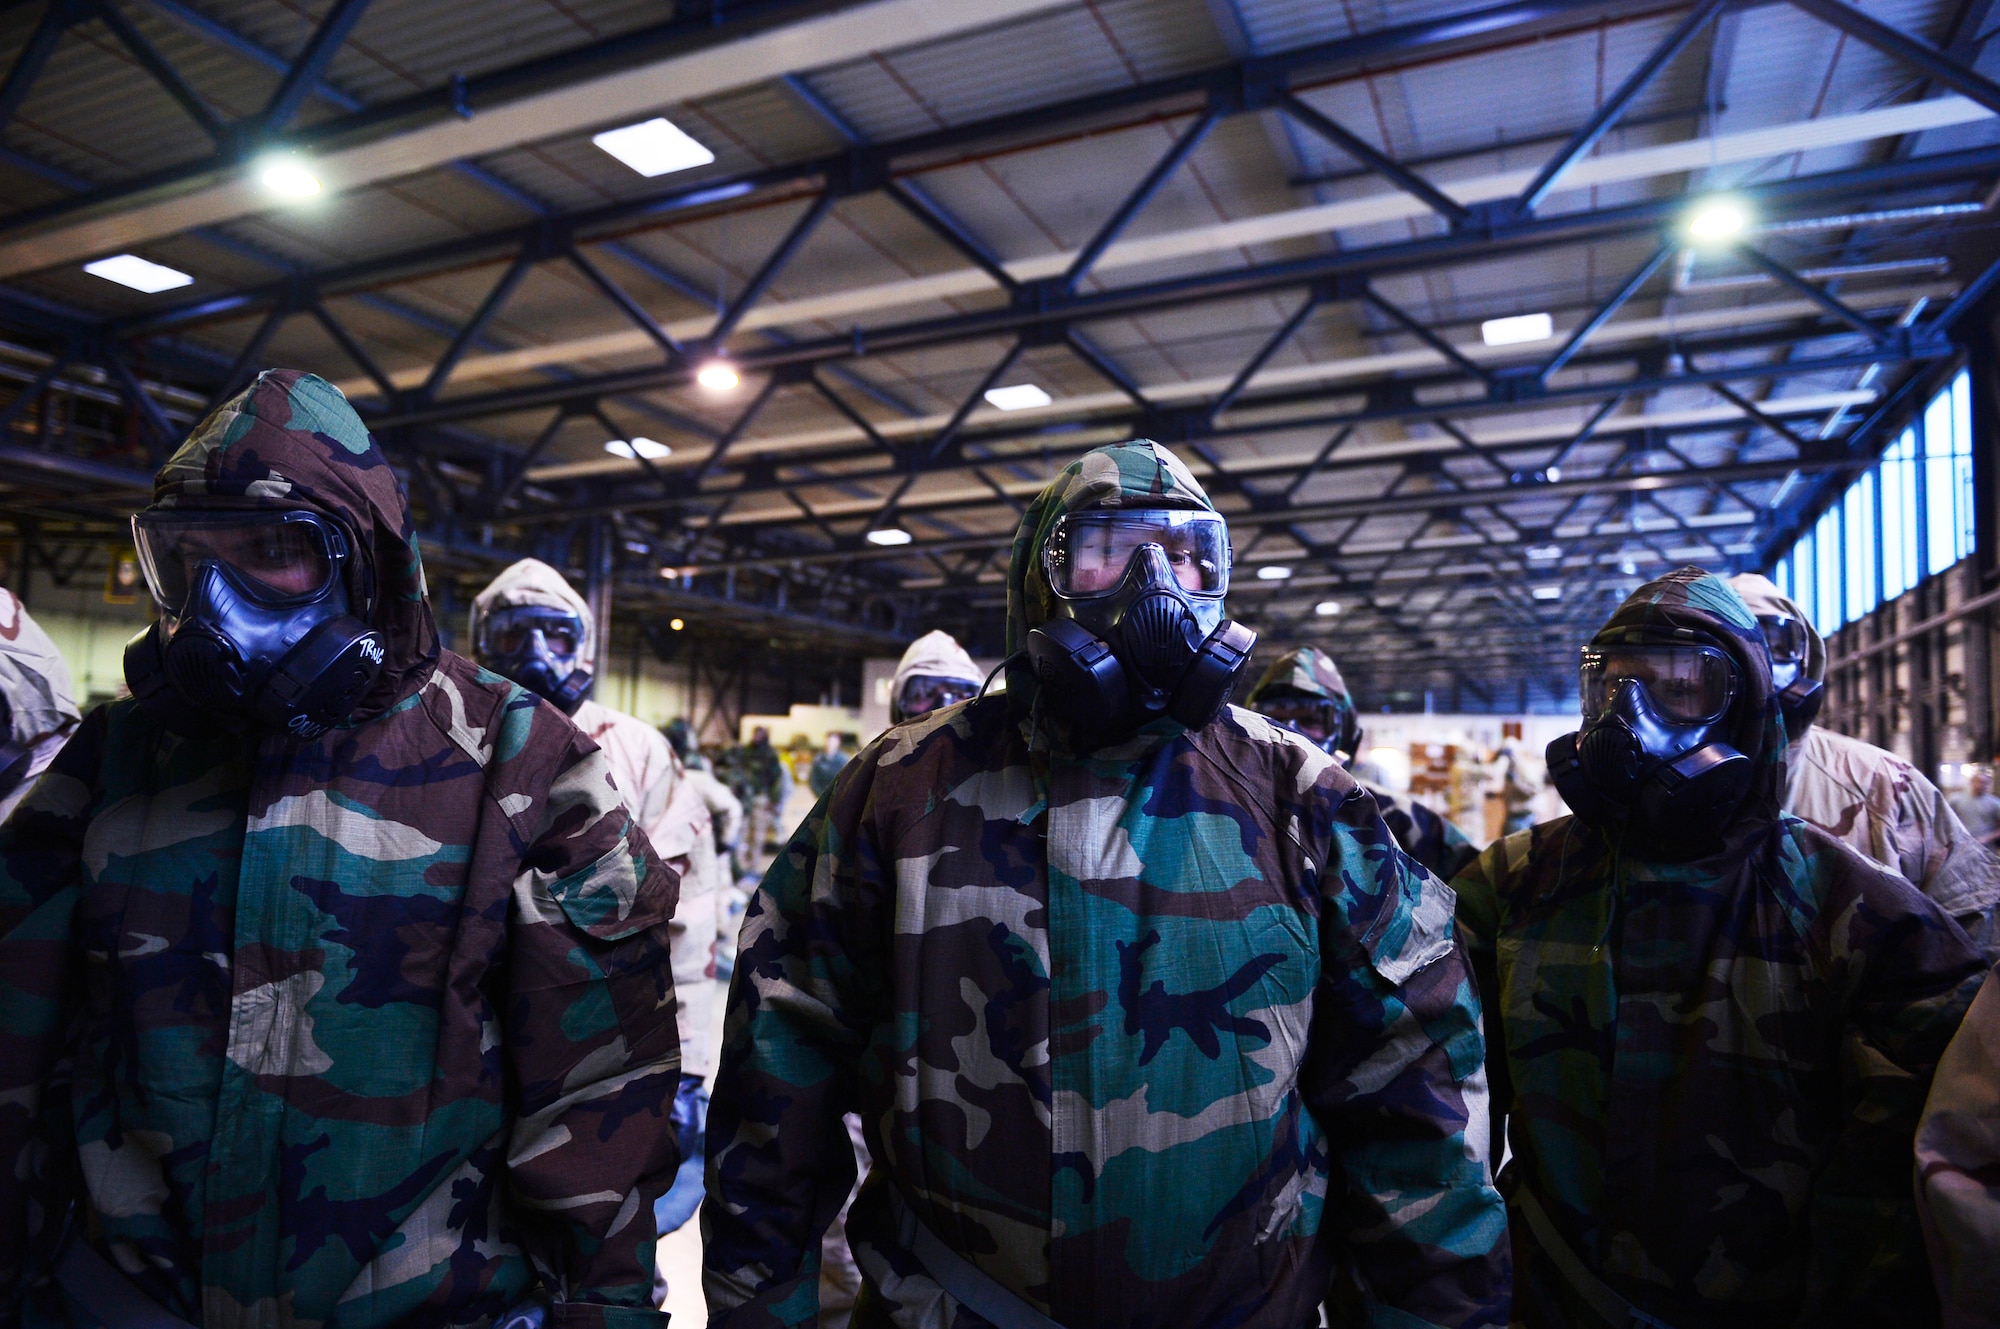 521st Air Mobility Operations Wing Airmen stand in protective gear during a chemical, biological, radiological, and nuclear training session on Ramstein Air Base, Germany, Feb. 16, 2018. The 721st Air Mobility Operations Group conducted a training day to ensure Airmen remain proficient in various warfighting skills. (U.S. Air Force photo by Senior Airman Joshua Magbanua)